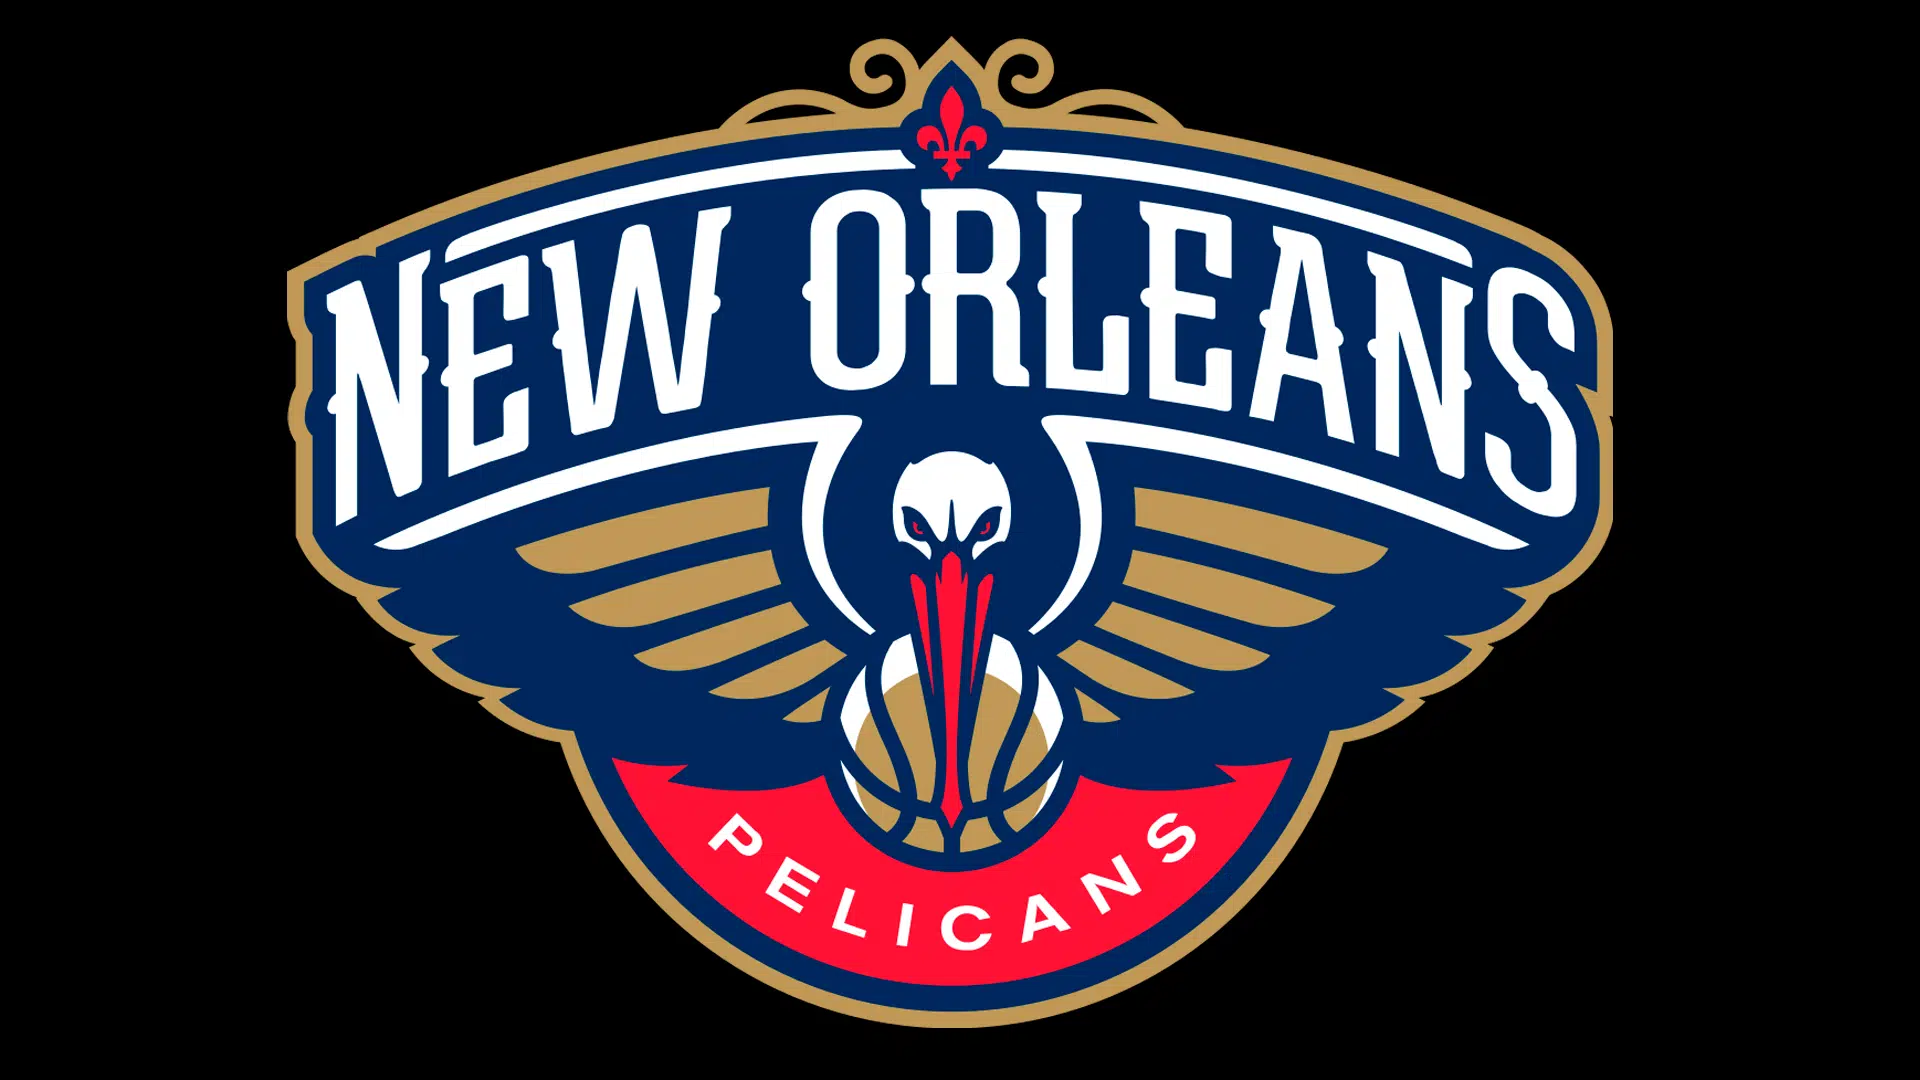 Pelicans are playoff bound  as they rally from 13 points down to beat the Clippers